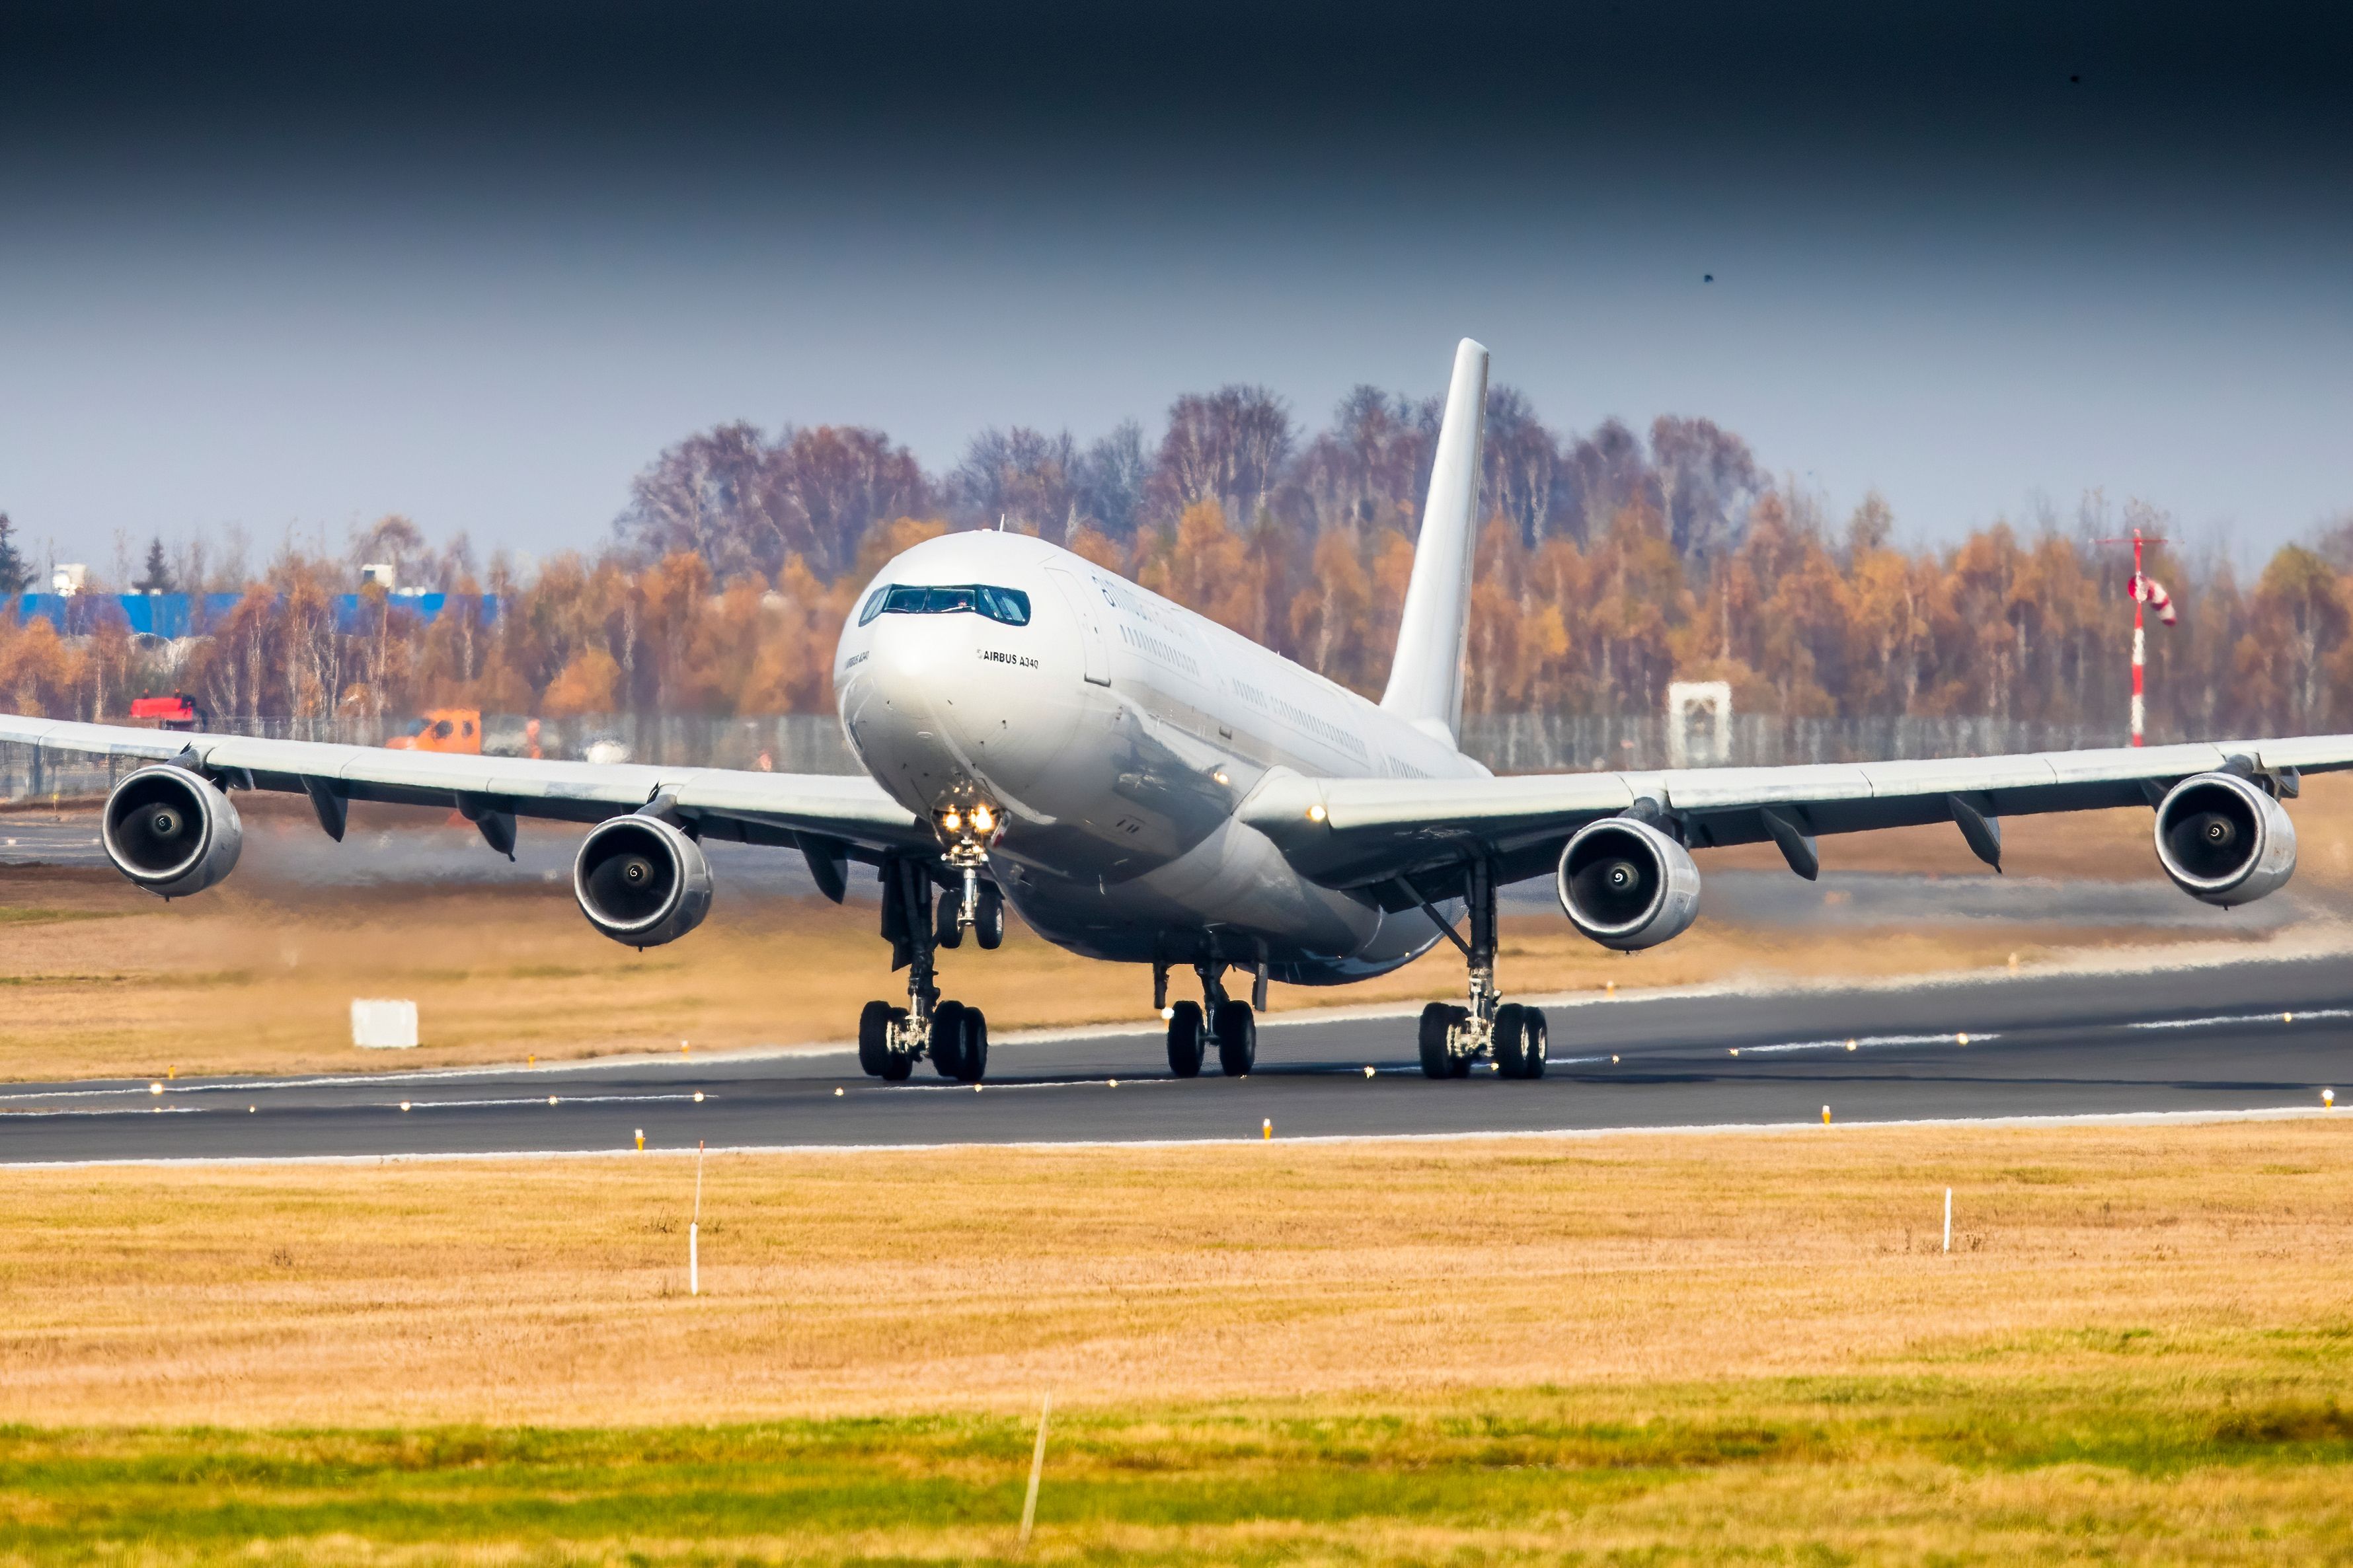 A White Airbus A340-300 Taking Off.